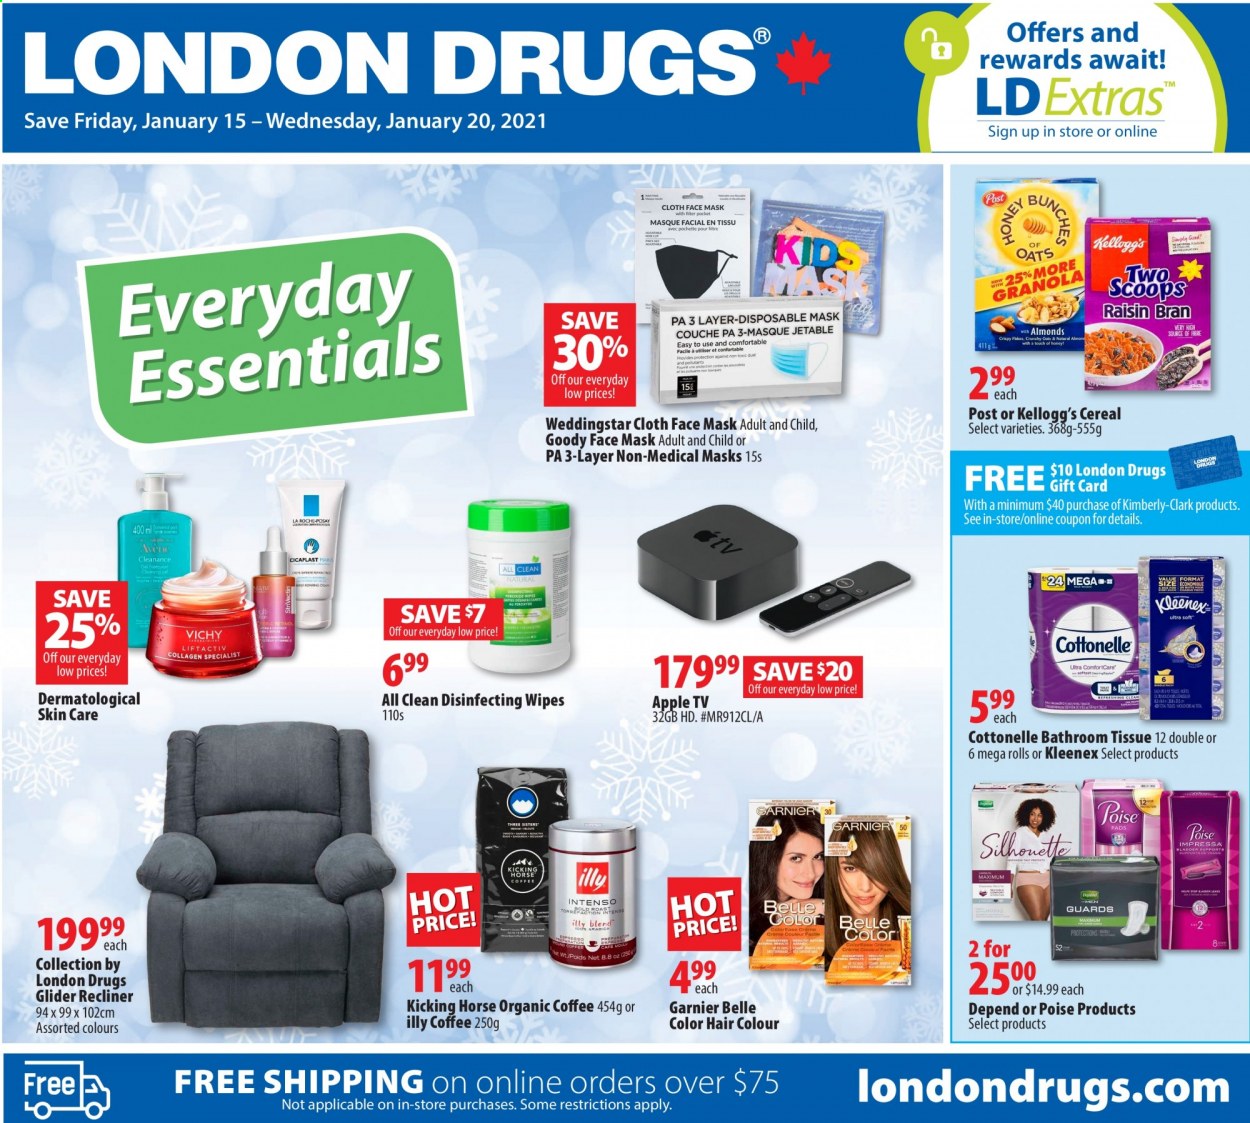 thumbnail - London Drugs Flyer - January 15, 2021 - January 20, 2021 - Sales products - Apple, Kellogg's, cereals, Illy, wipes, bath tissue, Cottonelle, Kleenex, face mask, hair color, TV, recliner chair, Garnier. Page 1.